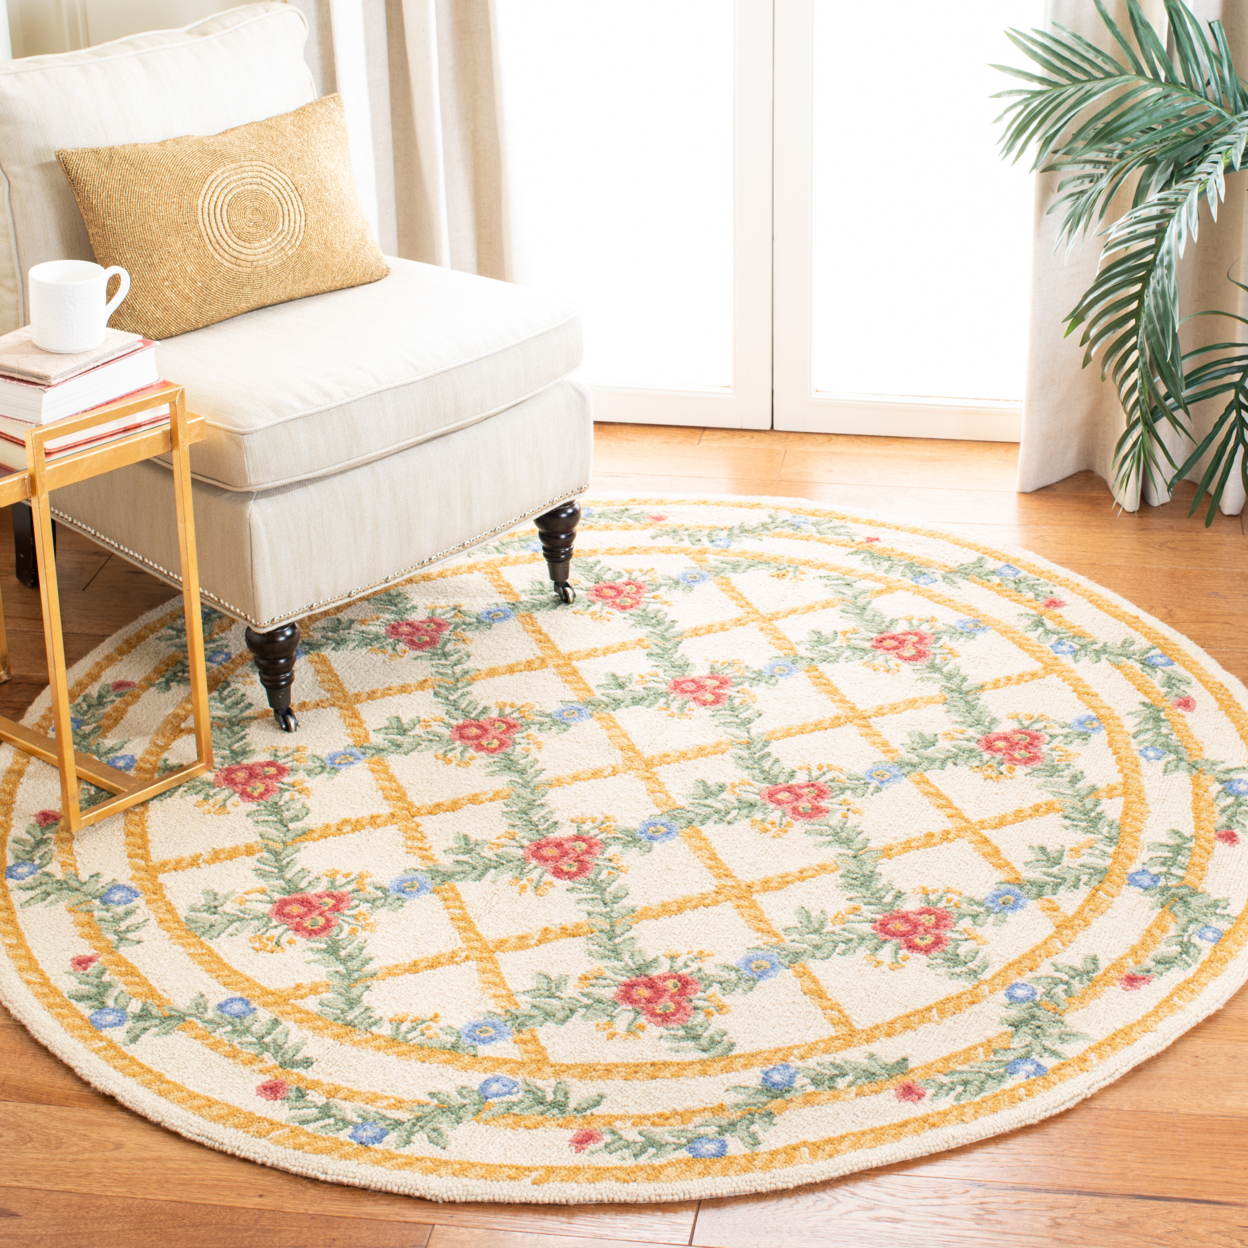 SAFAVIEH Chelsea Collection HK62A Hand-hooked Ivory Rug - 5' 6 Round